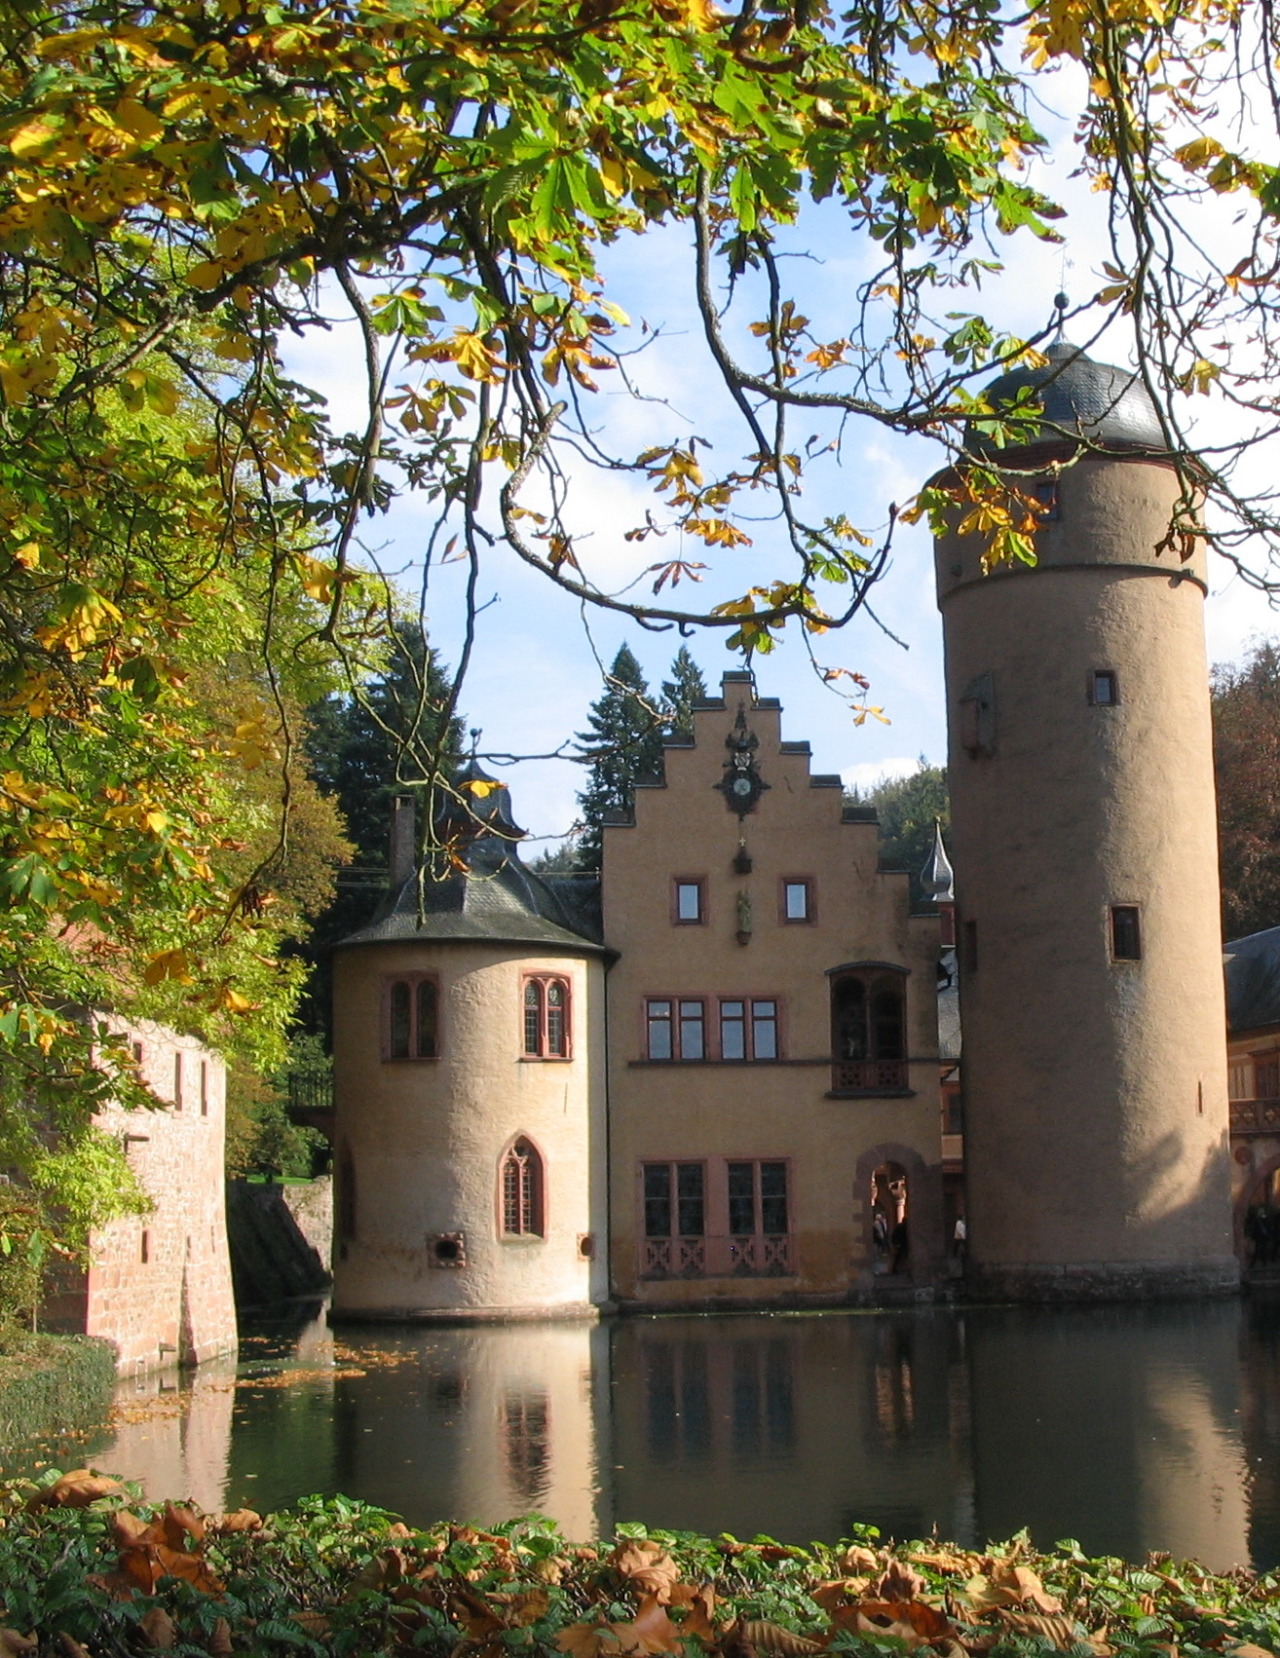 Mespelbrunn Castle, one of the most visited water castles in Germany